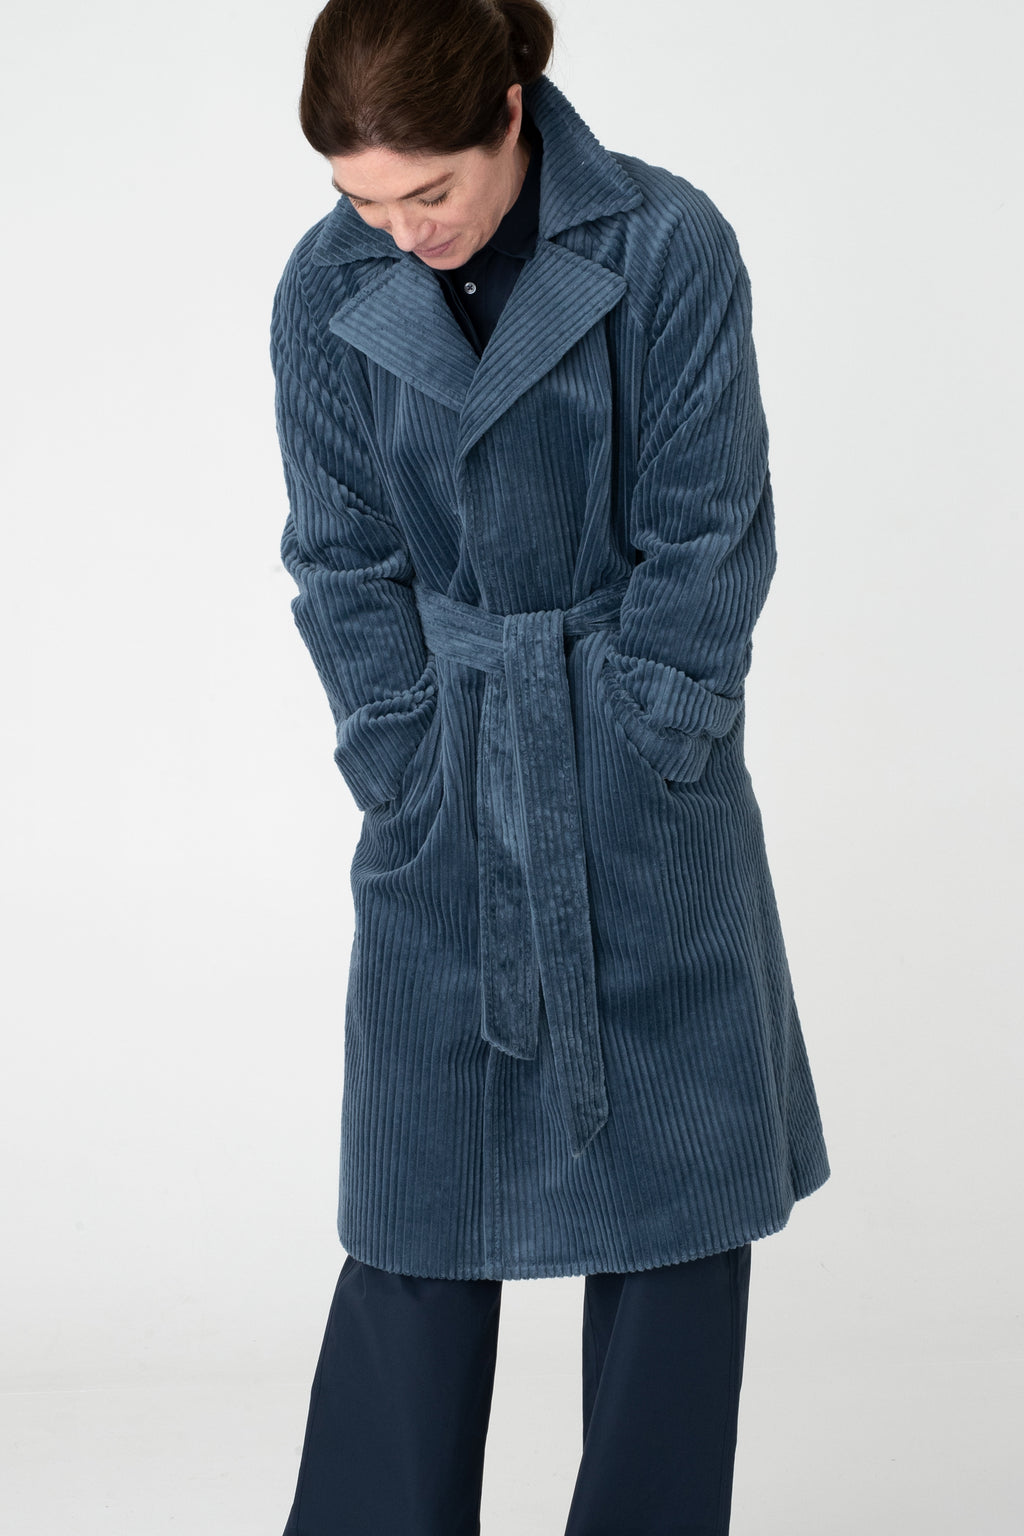 Sky Blue cord coat, belted with raglan sleeve